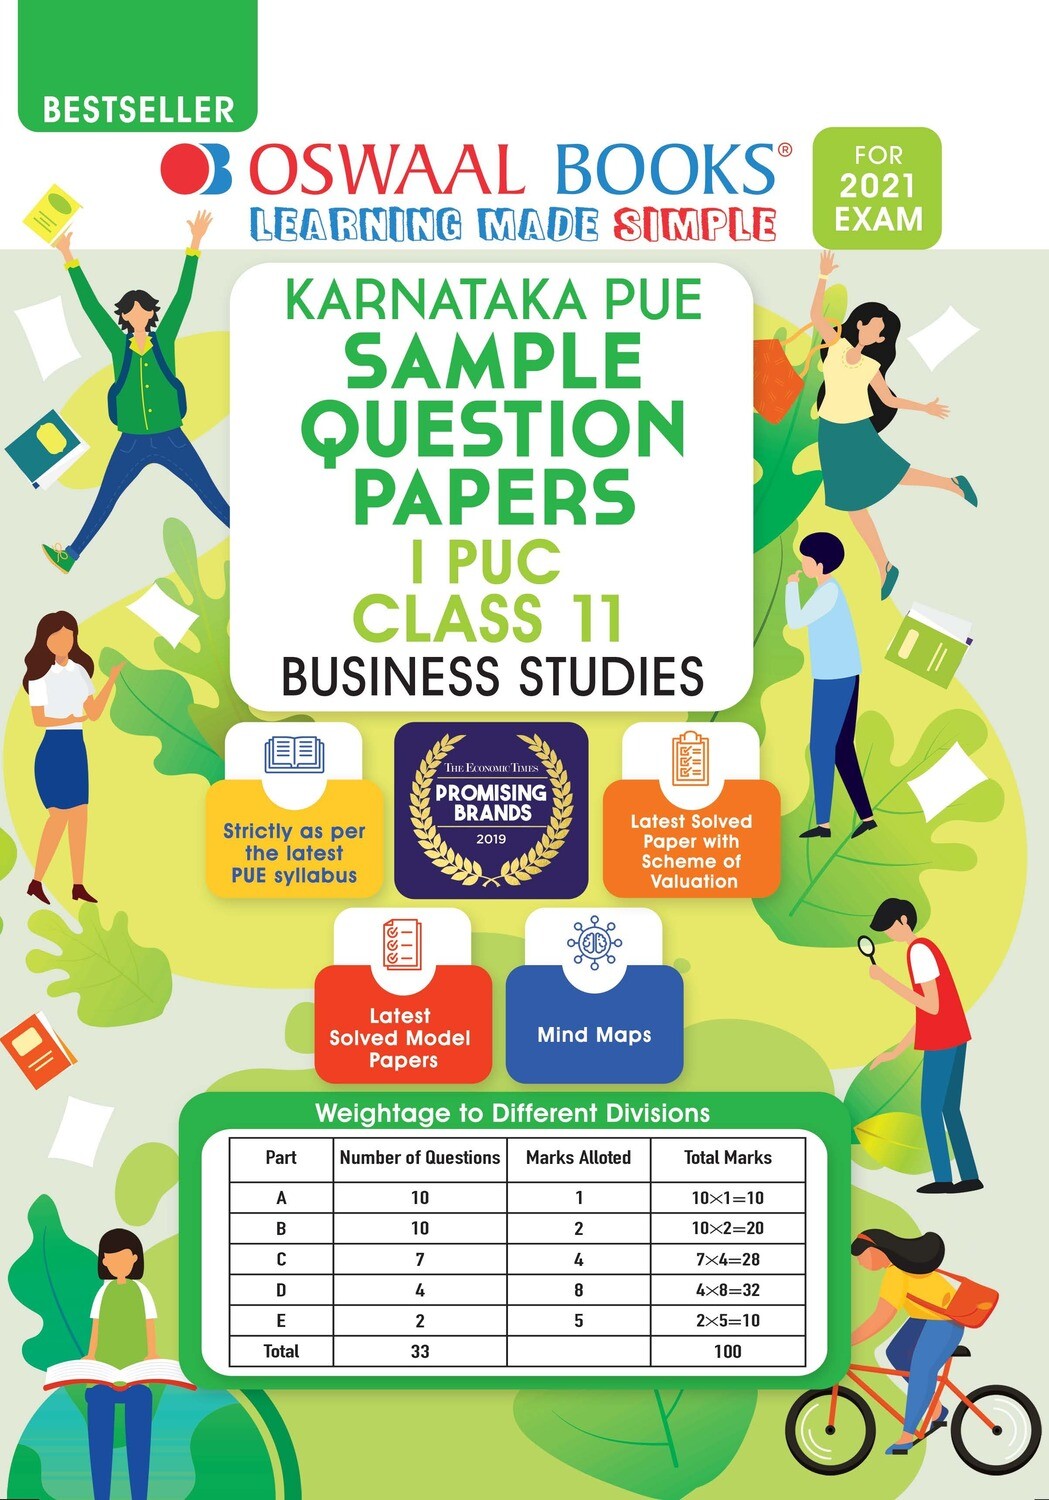 Buy e-book: Oswaal Karnataka PUE Sample Question Papers I PUC Class 11 Business Studies (For 2021 Exam)